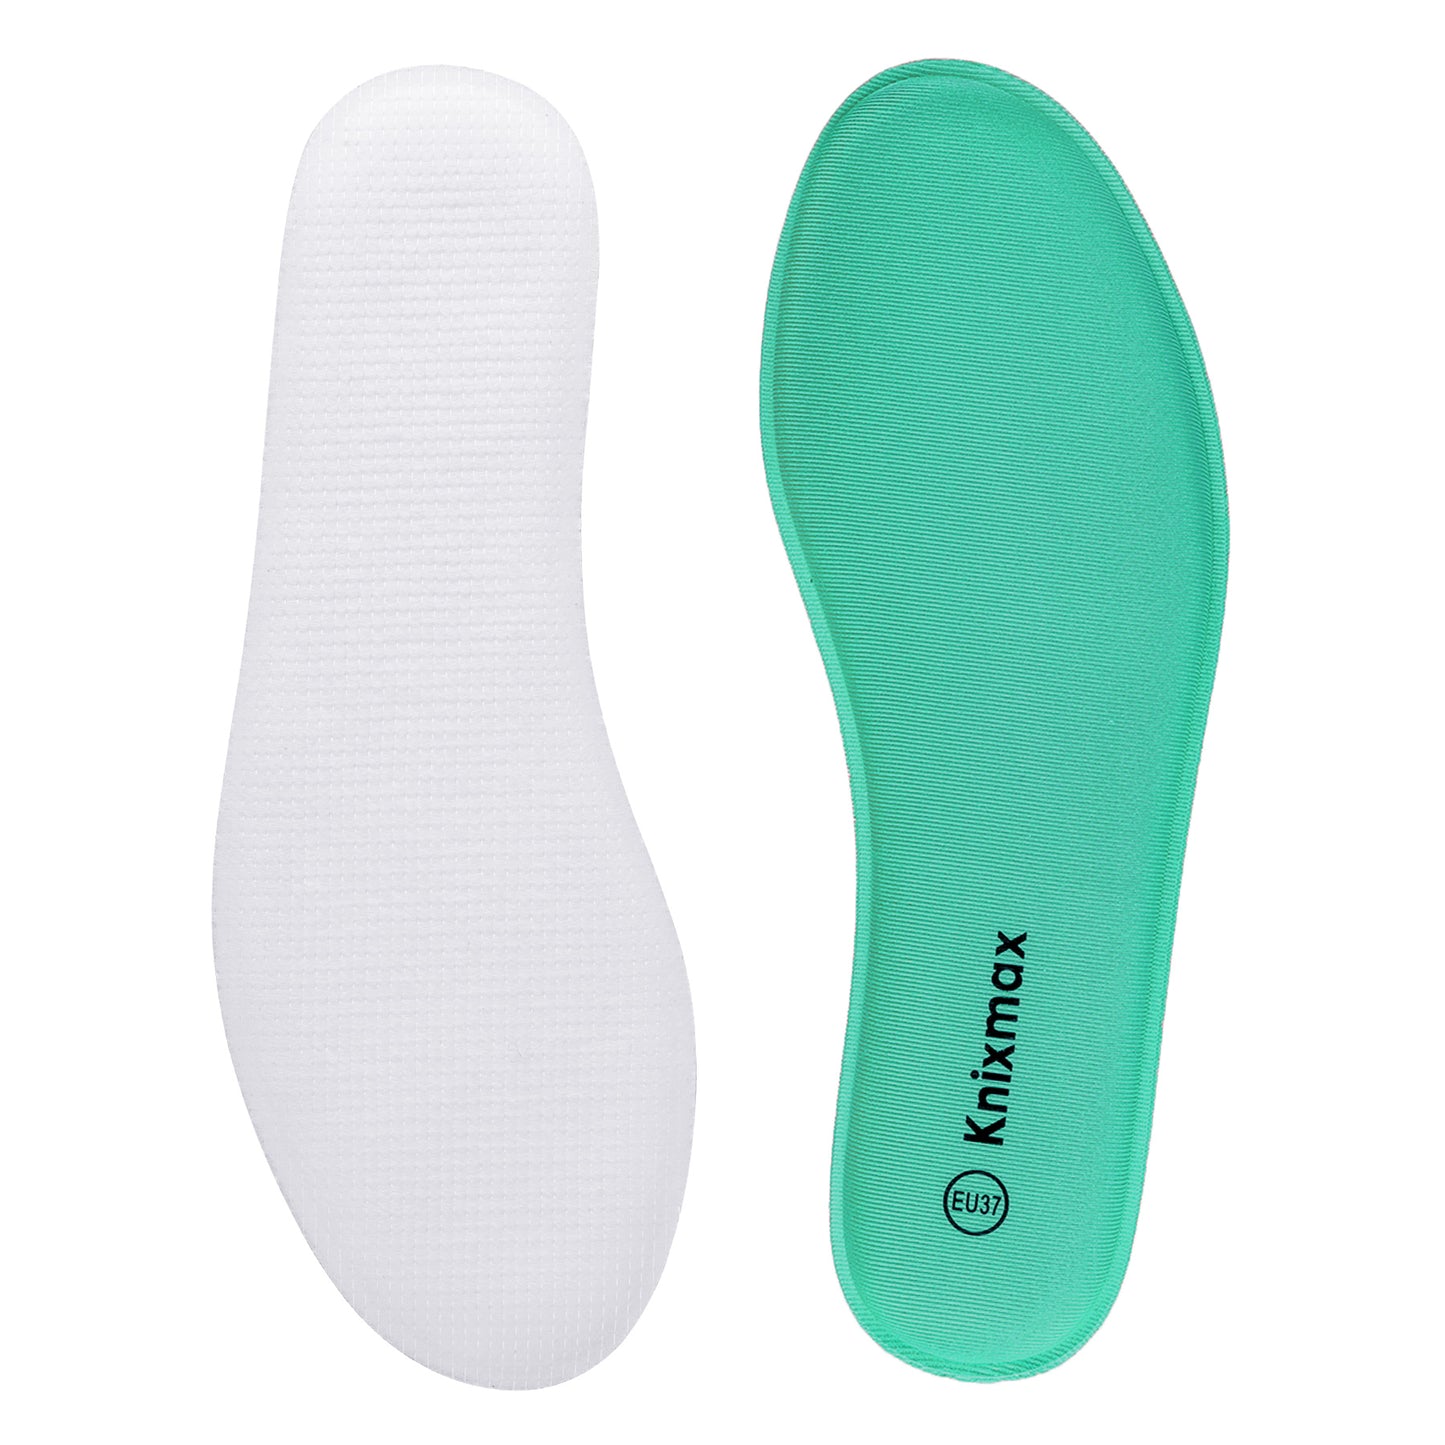 Knixmax Women's Memory Foam Insoles, Green, for Athletic Shoes & Sneakers